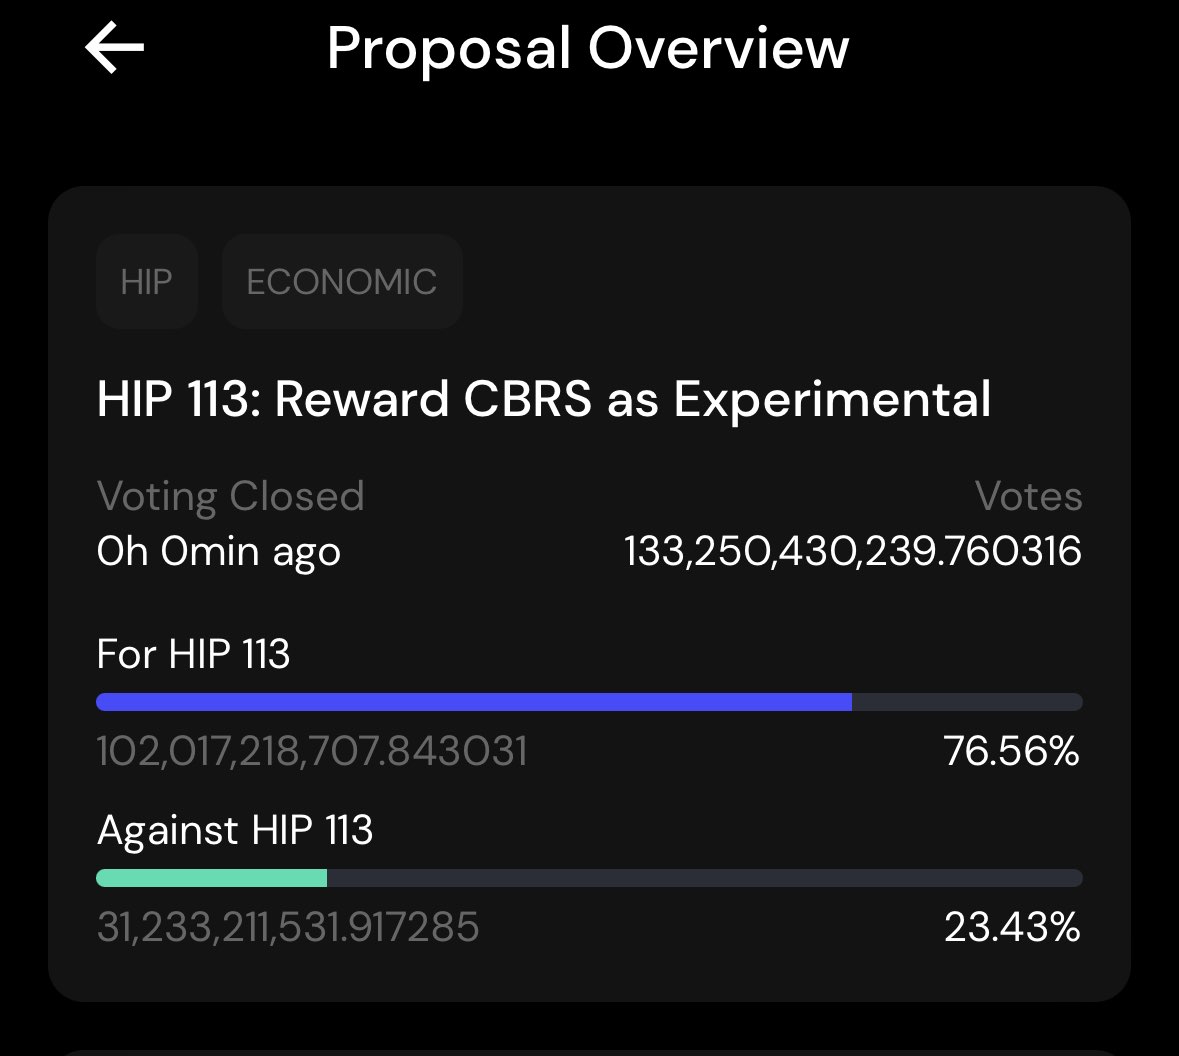 HIP 113 passed! Thanks to Helium veMOBILE voters for your support

It's inspiring that CBRS radio hosts have mined >95% of MOBILE PoC rewards and still voted to reduce their own rewards by 75% to build a better network

Our community is second to none 🤝